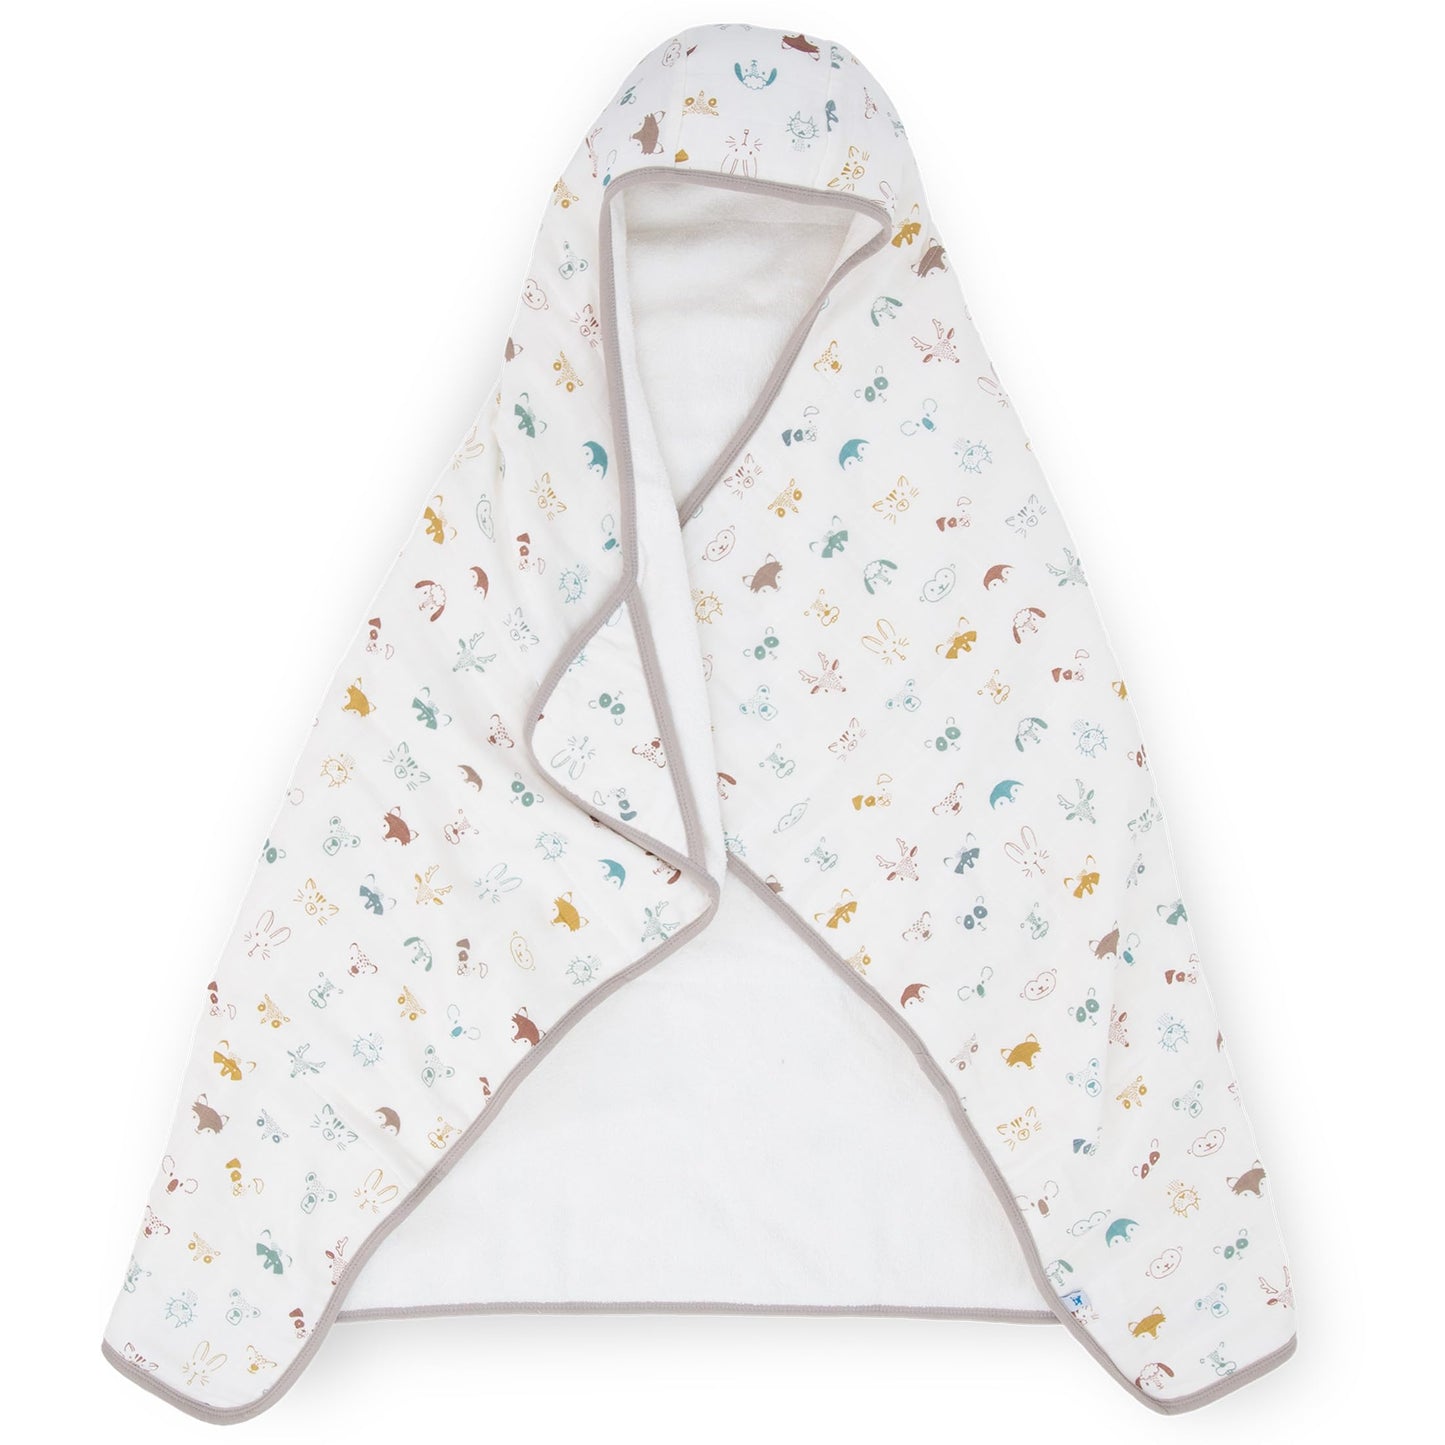 Little Unicorn Large Cotton Hooded Towel – 100% Cotton – 42” Tall x 47” Wide – Printed Pockets – for 2-5 Year Olds - Machine Washable – Playful Designs – for Boys & Girls (Tropical Leaf)